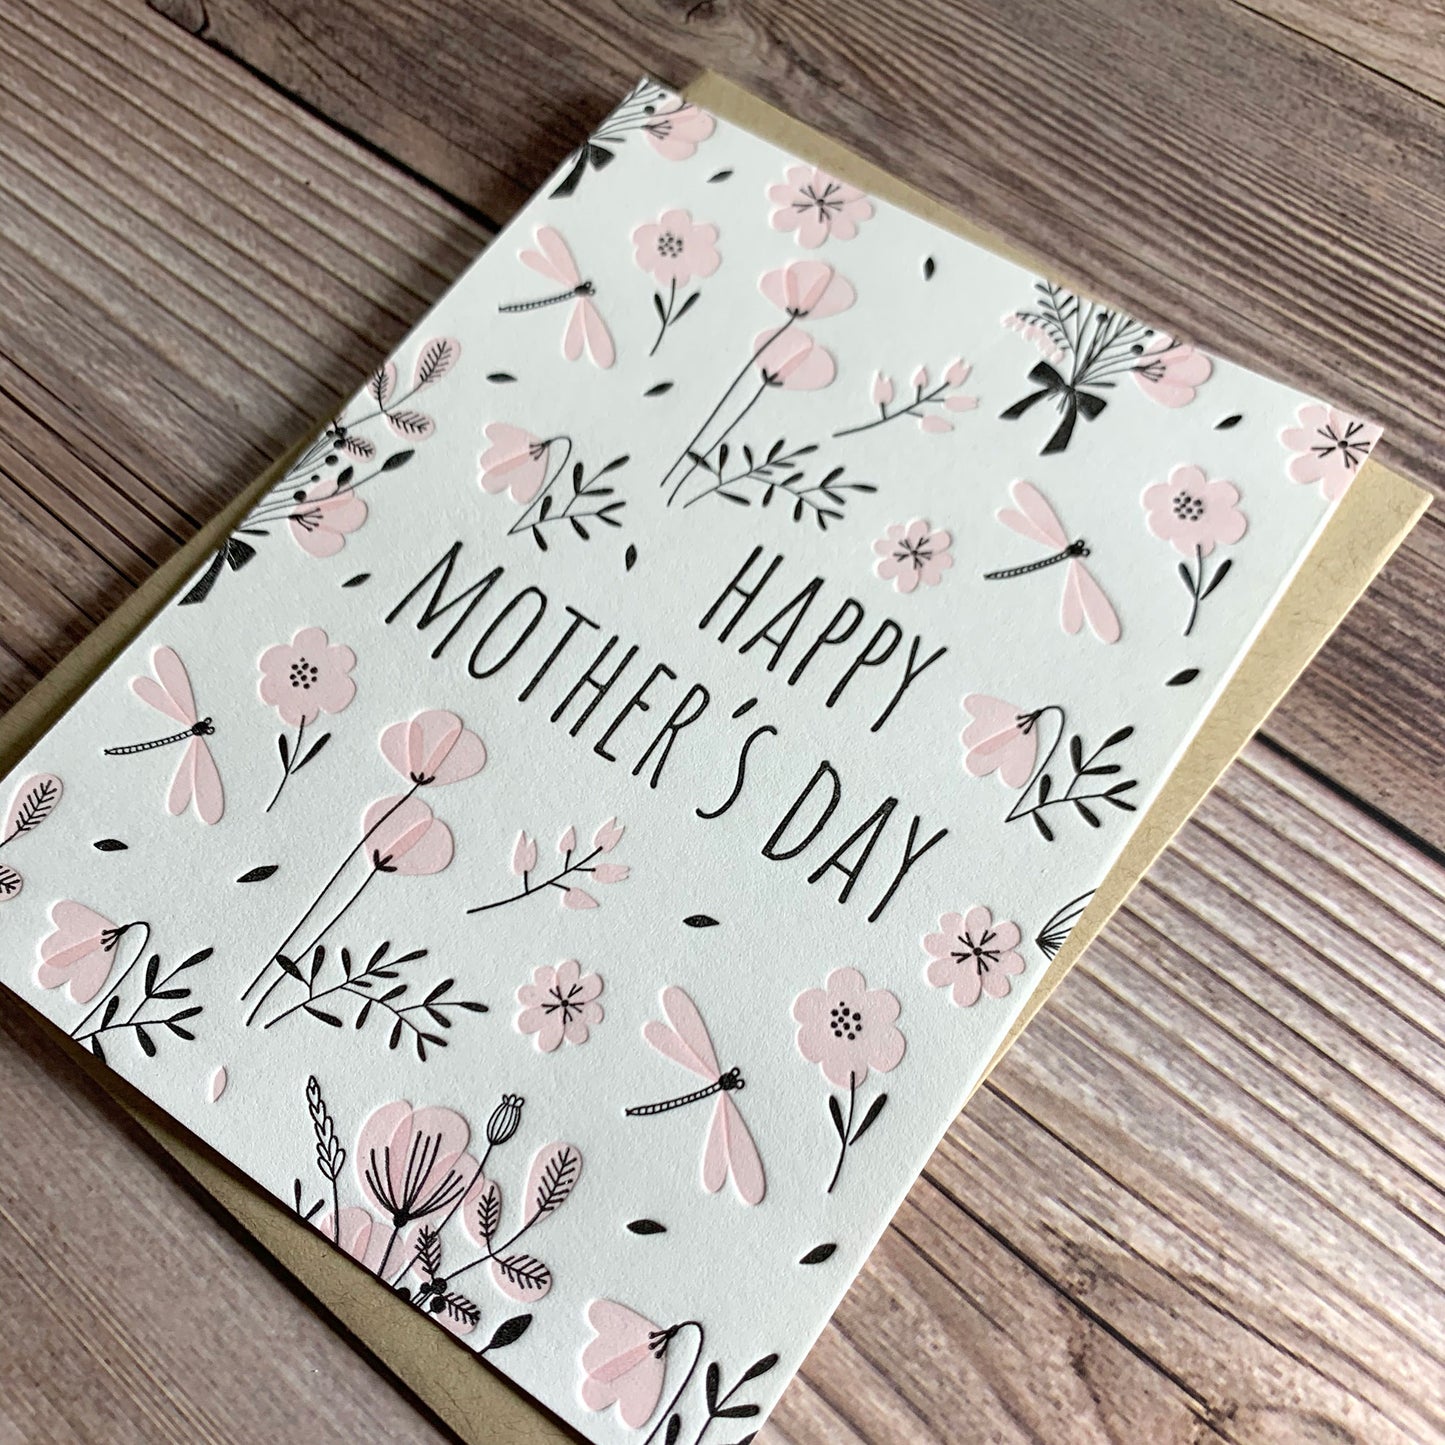 Floral Mother's Day Card, Happy Mother's Day, Letterpress printed, view shows letterpress impression, includes envelope